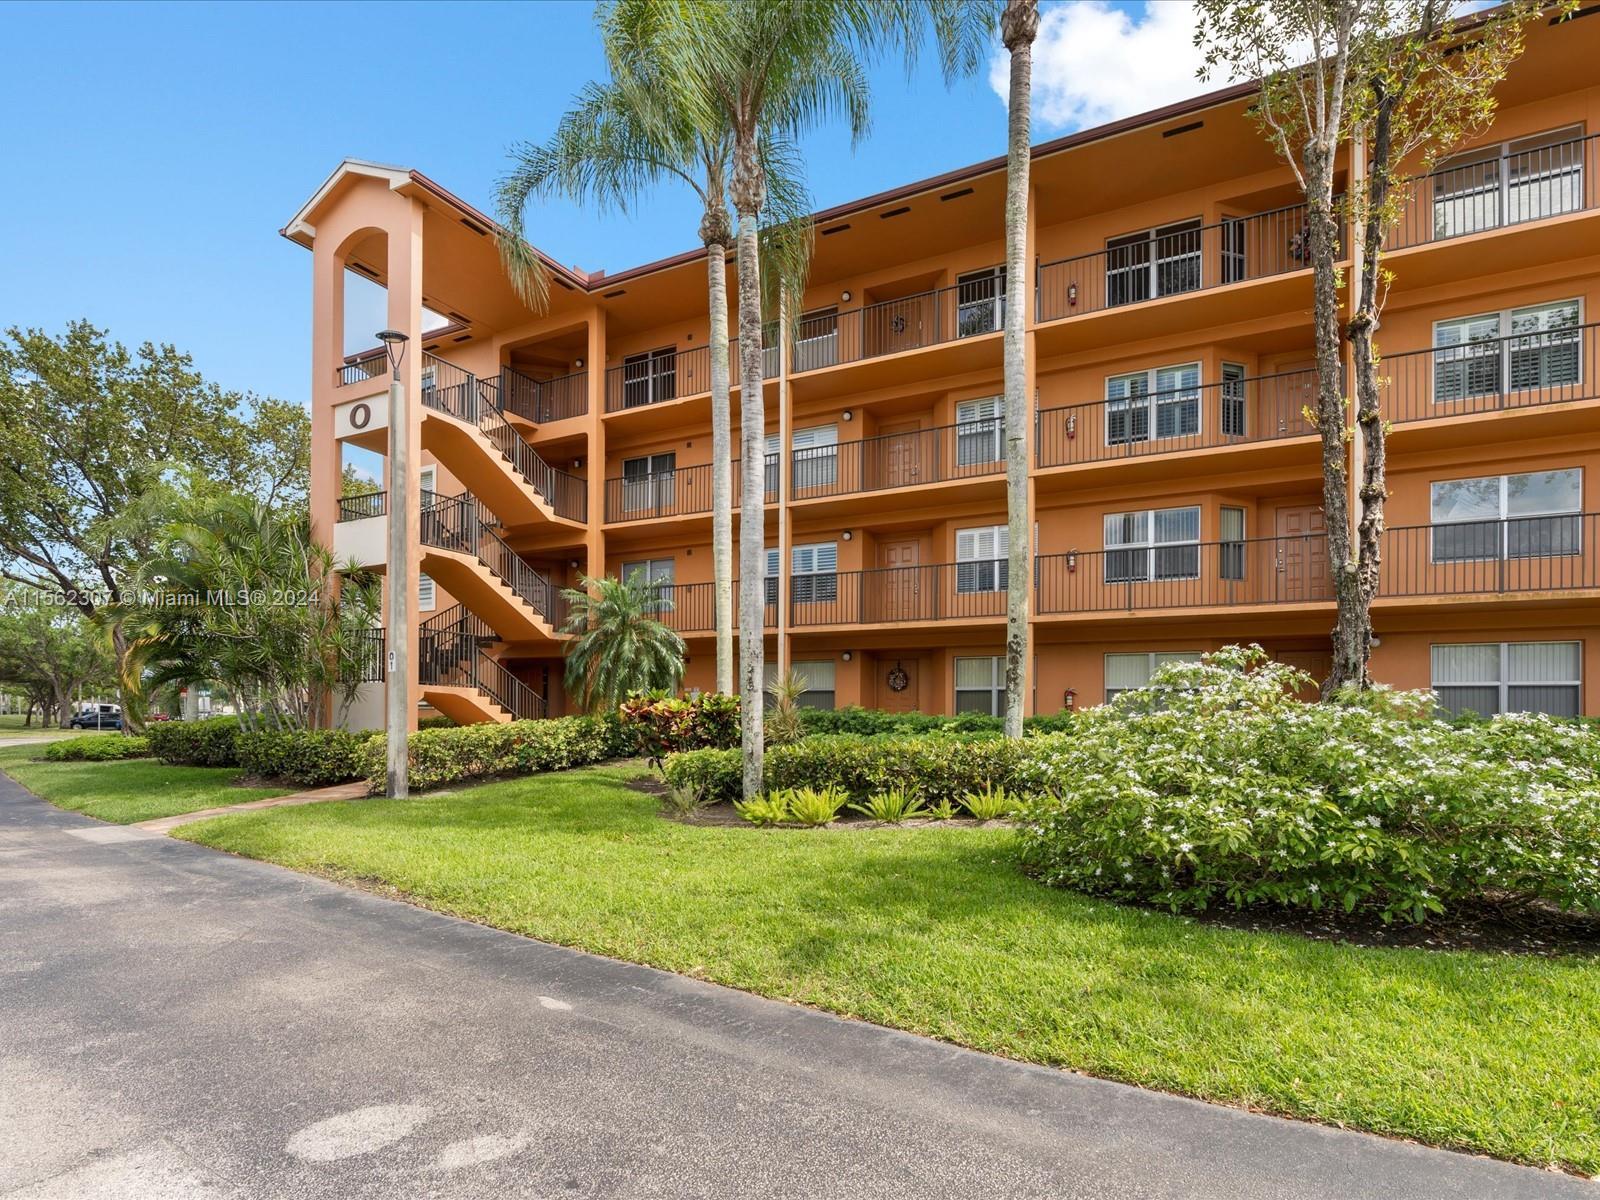 Photo of 571 SW 142nd Ave #101O in Pembroke Pines, FL